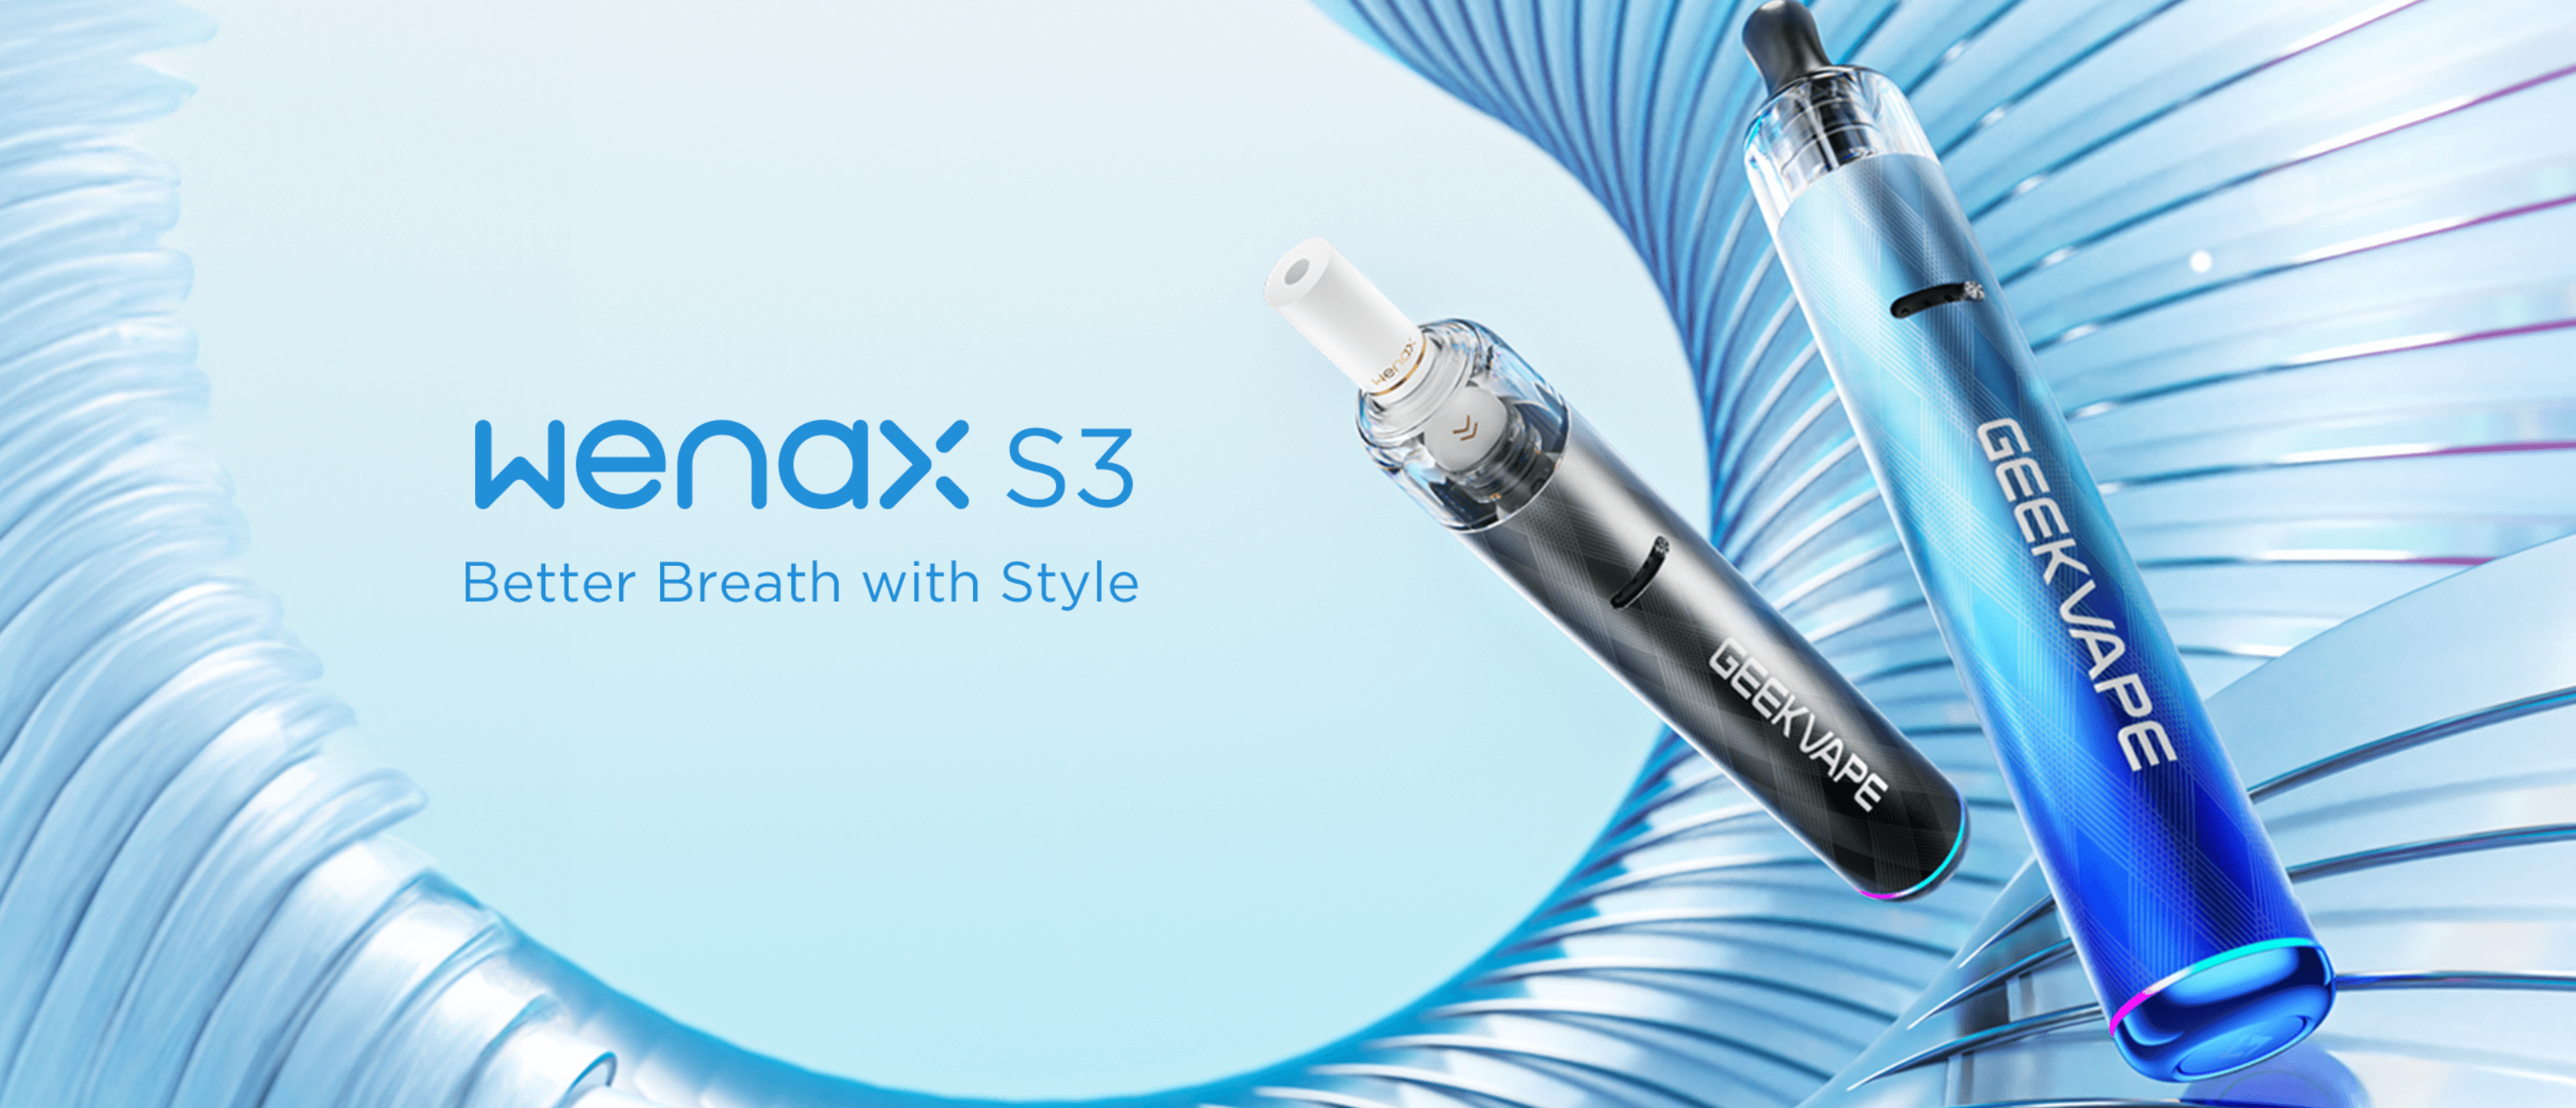 Geek Vape Wenax S3 - breath better with style